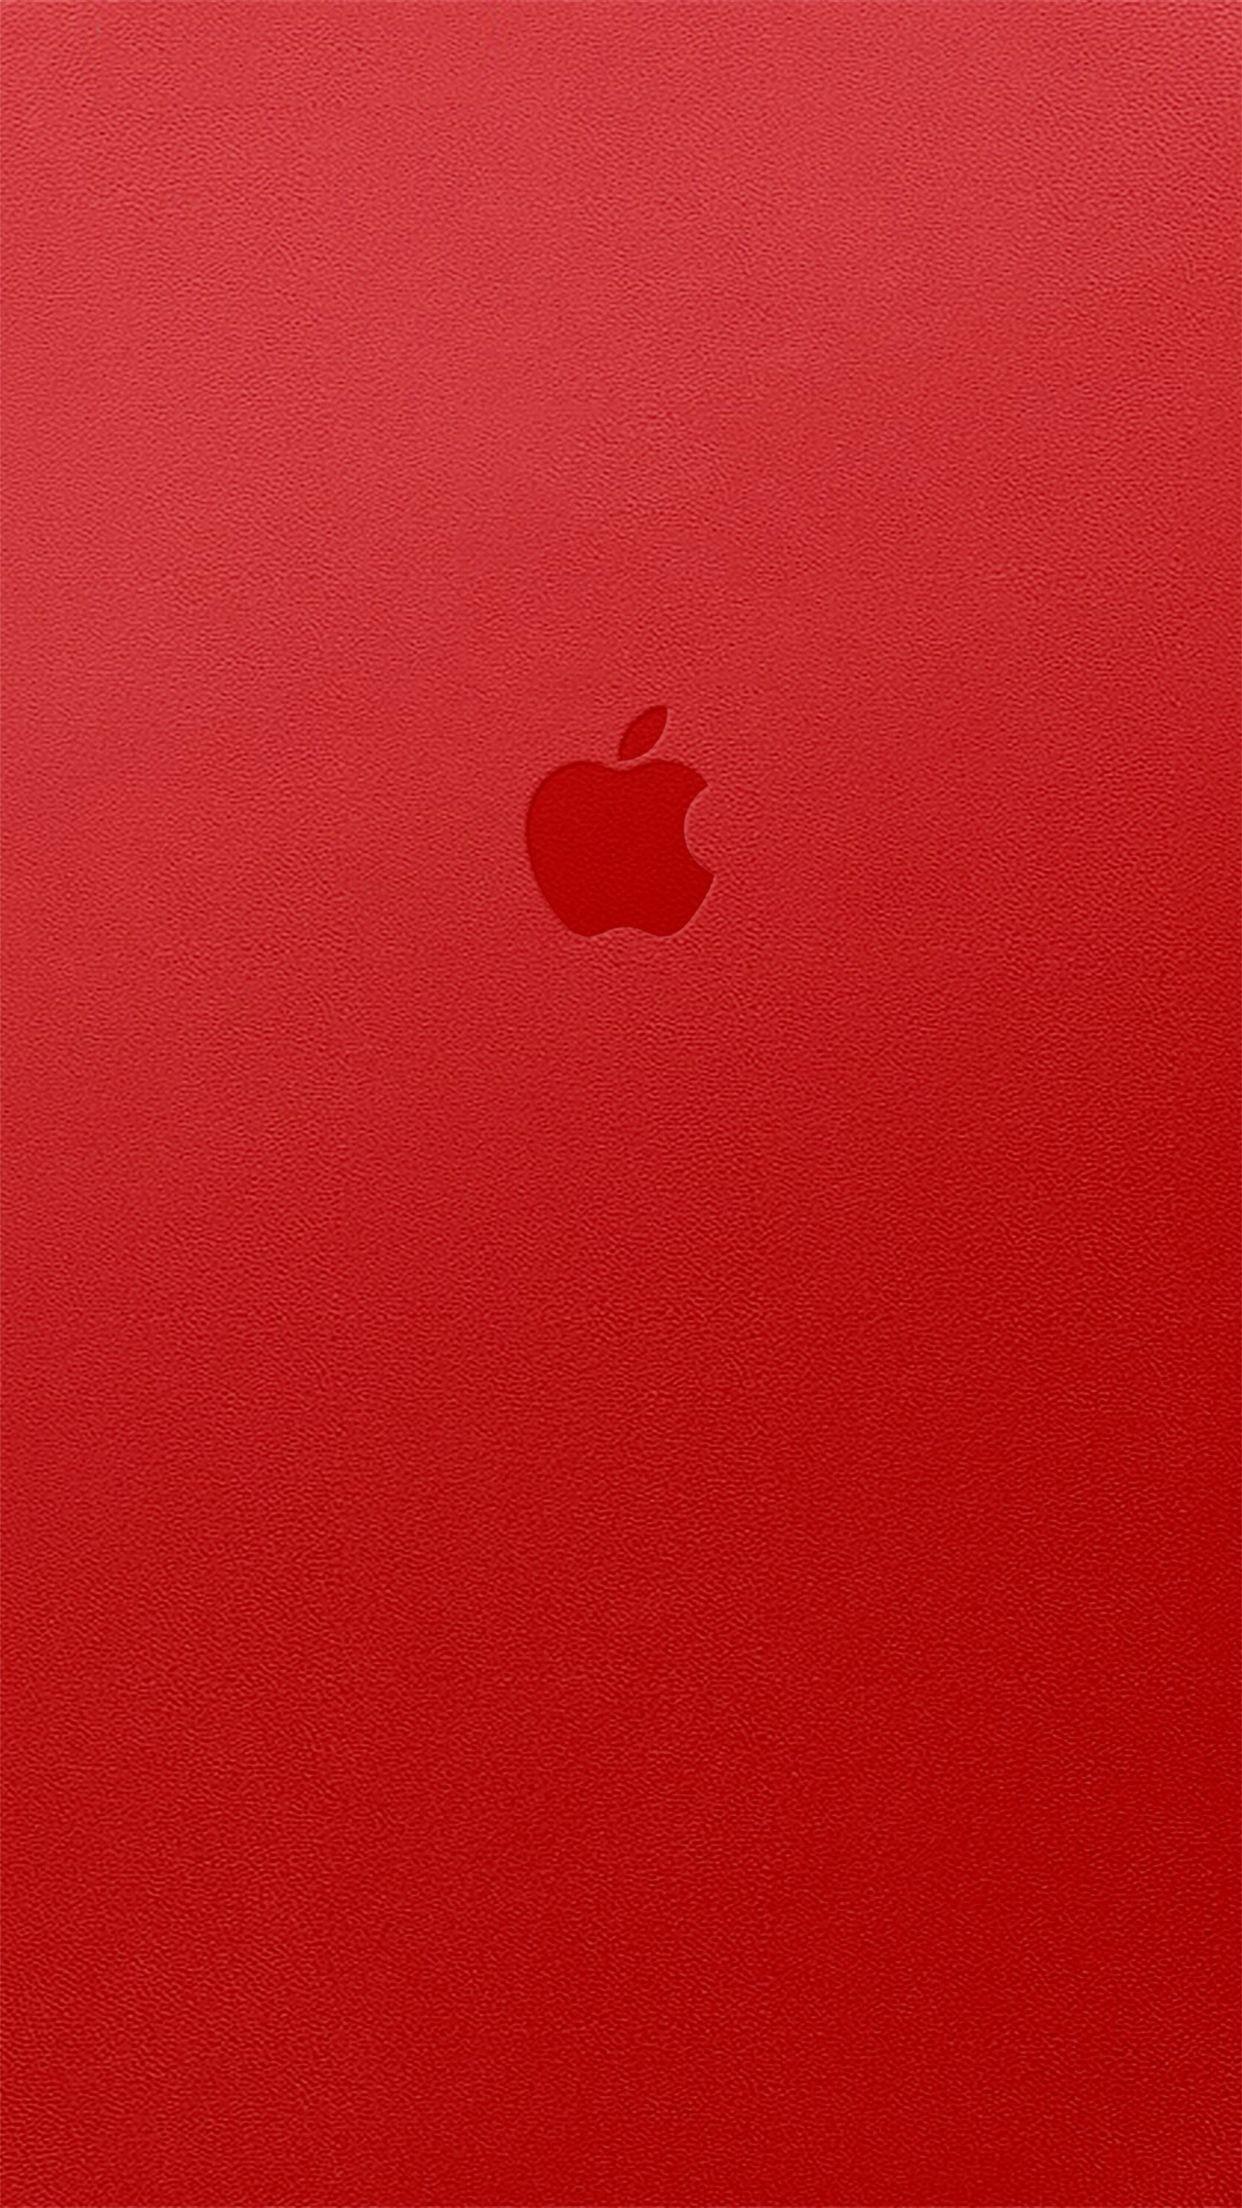 86+ Red Iphone Wallpapers